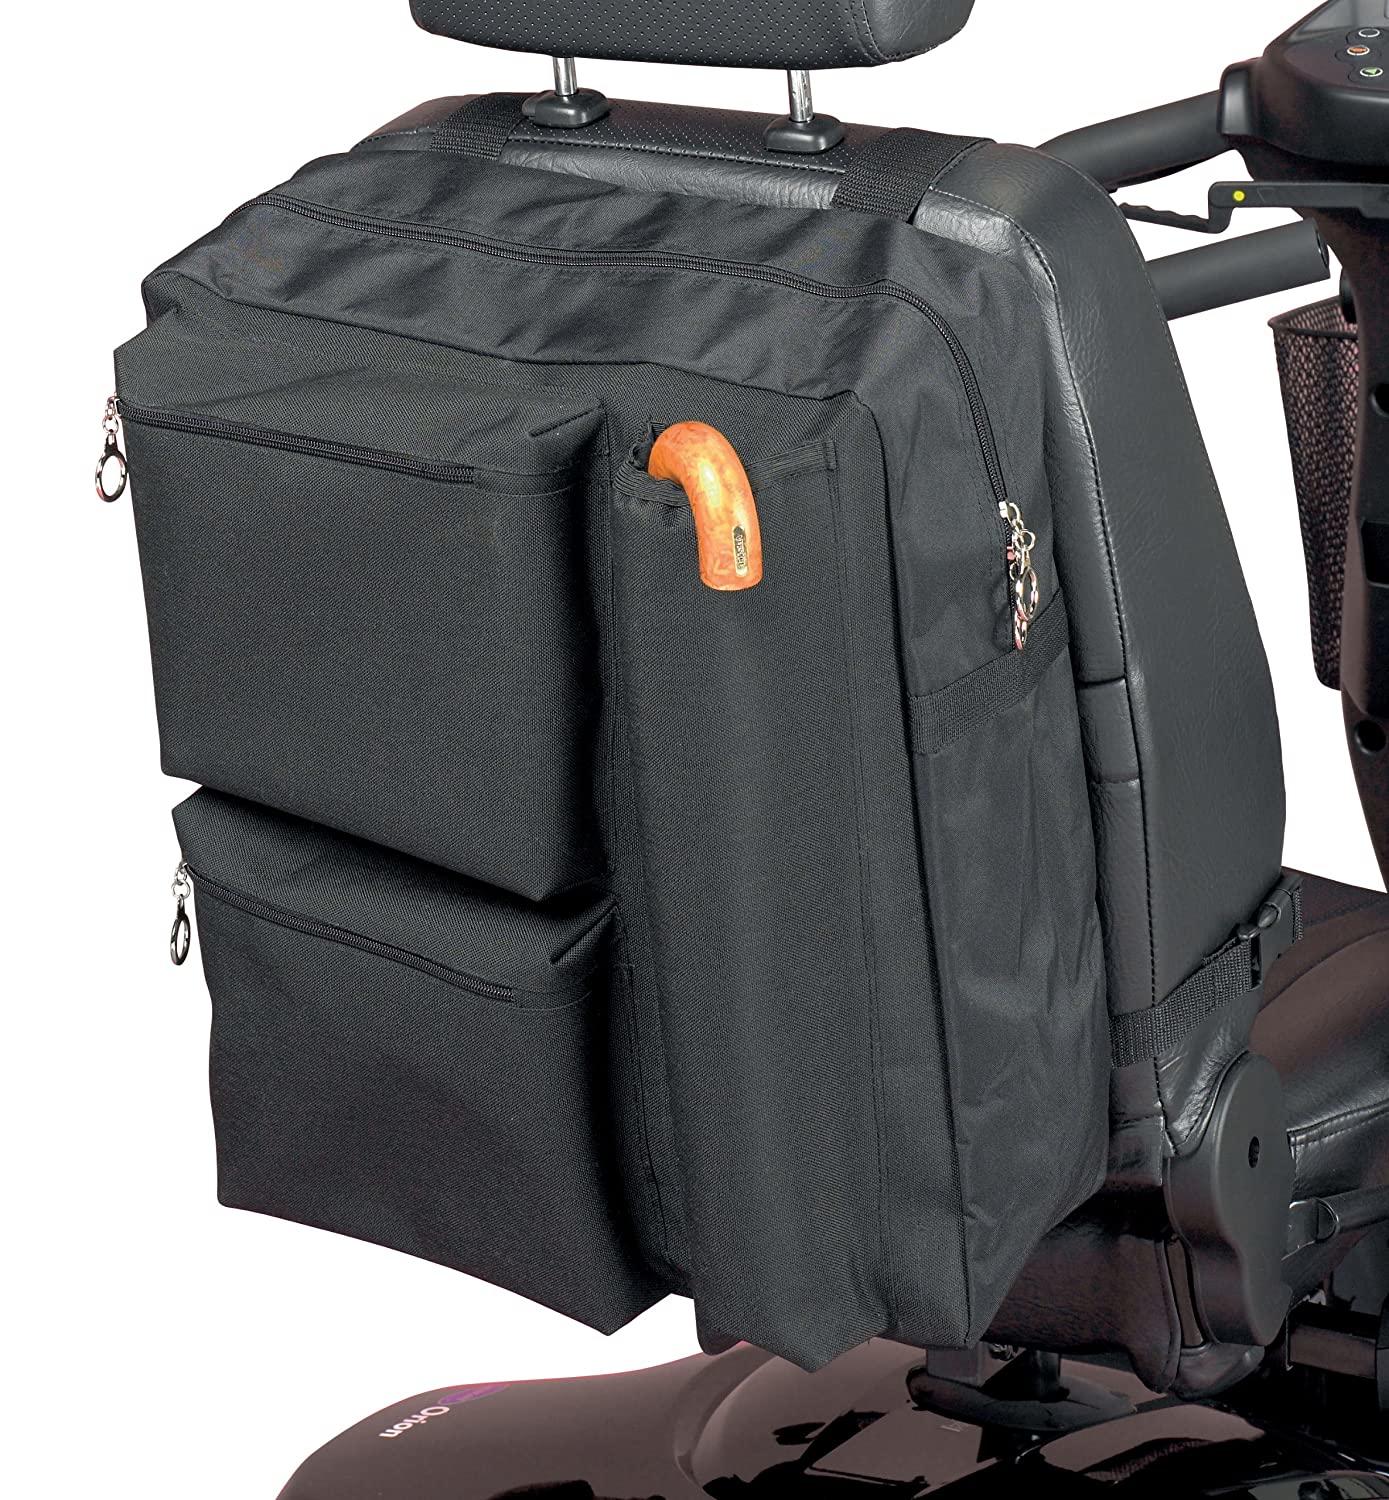 Deluxe Mobility Scooter Bag | Only £14.95 with VAT Relief | Universal ...